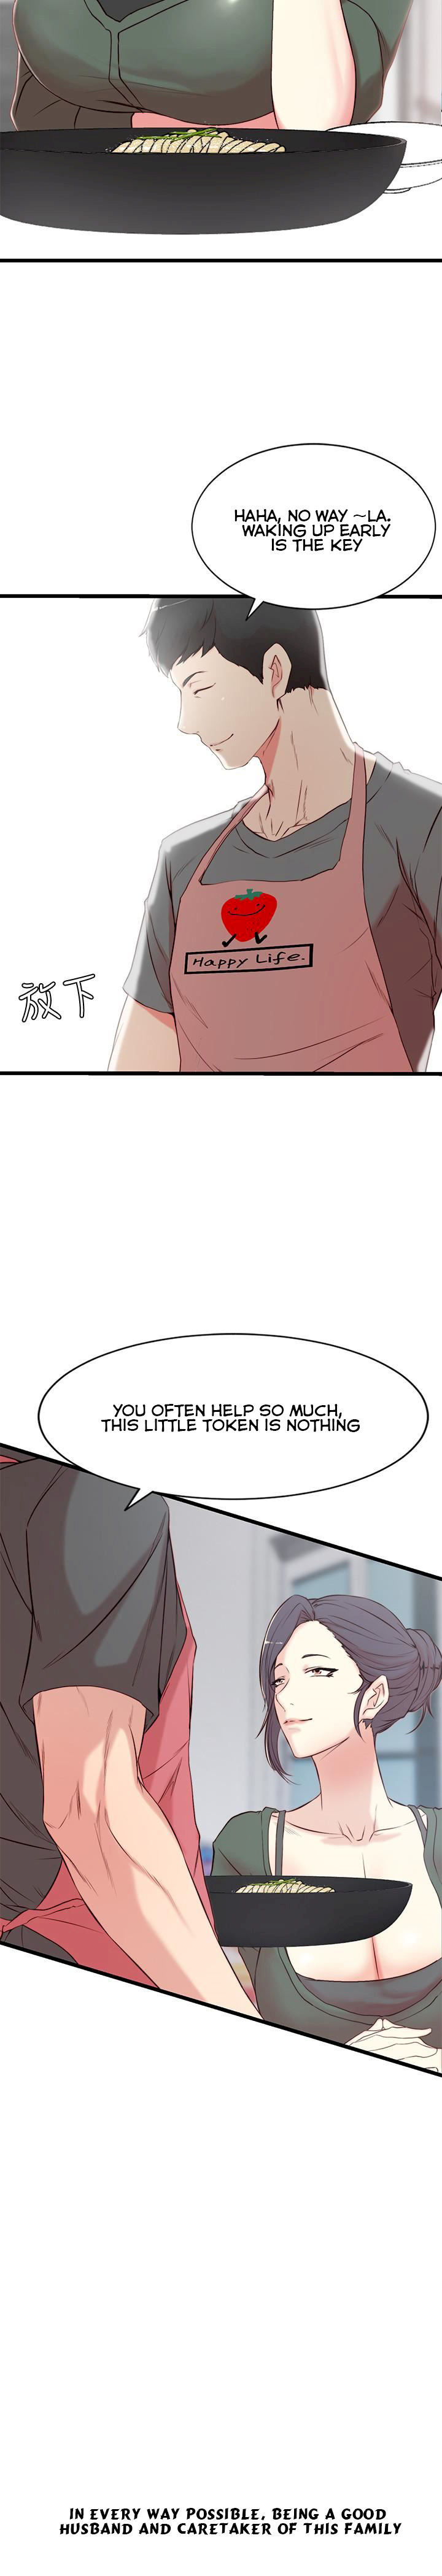 Sister In Law (Kim Jol Gu) - Chapter 1 Page 4